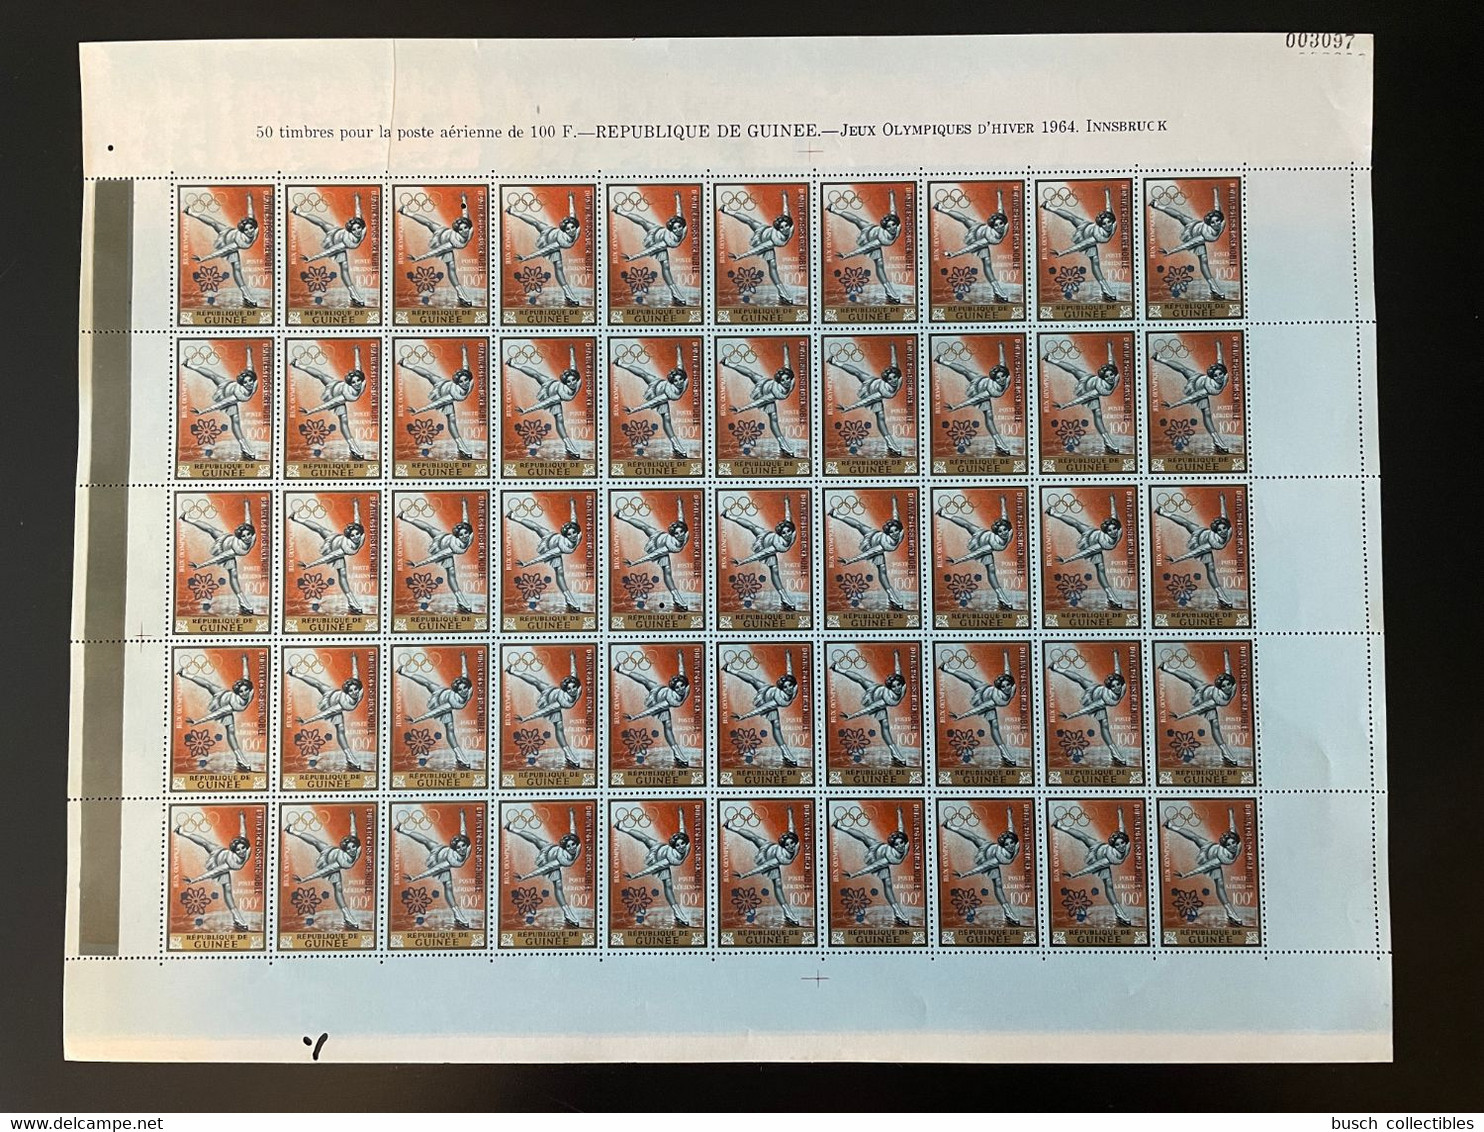 Guinée Guinea 1968 Mi. A-G 465 Full sheets surch. Overprint Grenoble Winter Olympic Games Jeux Olympiques Hiver Olympia